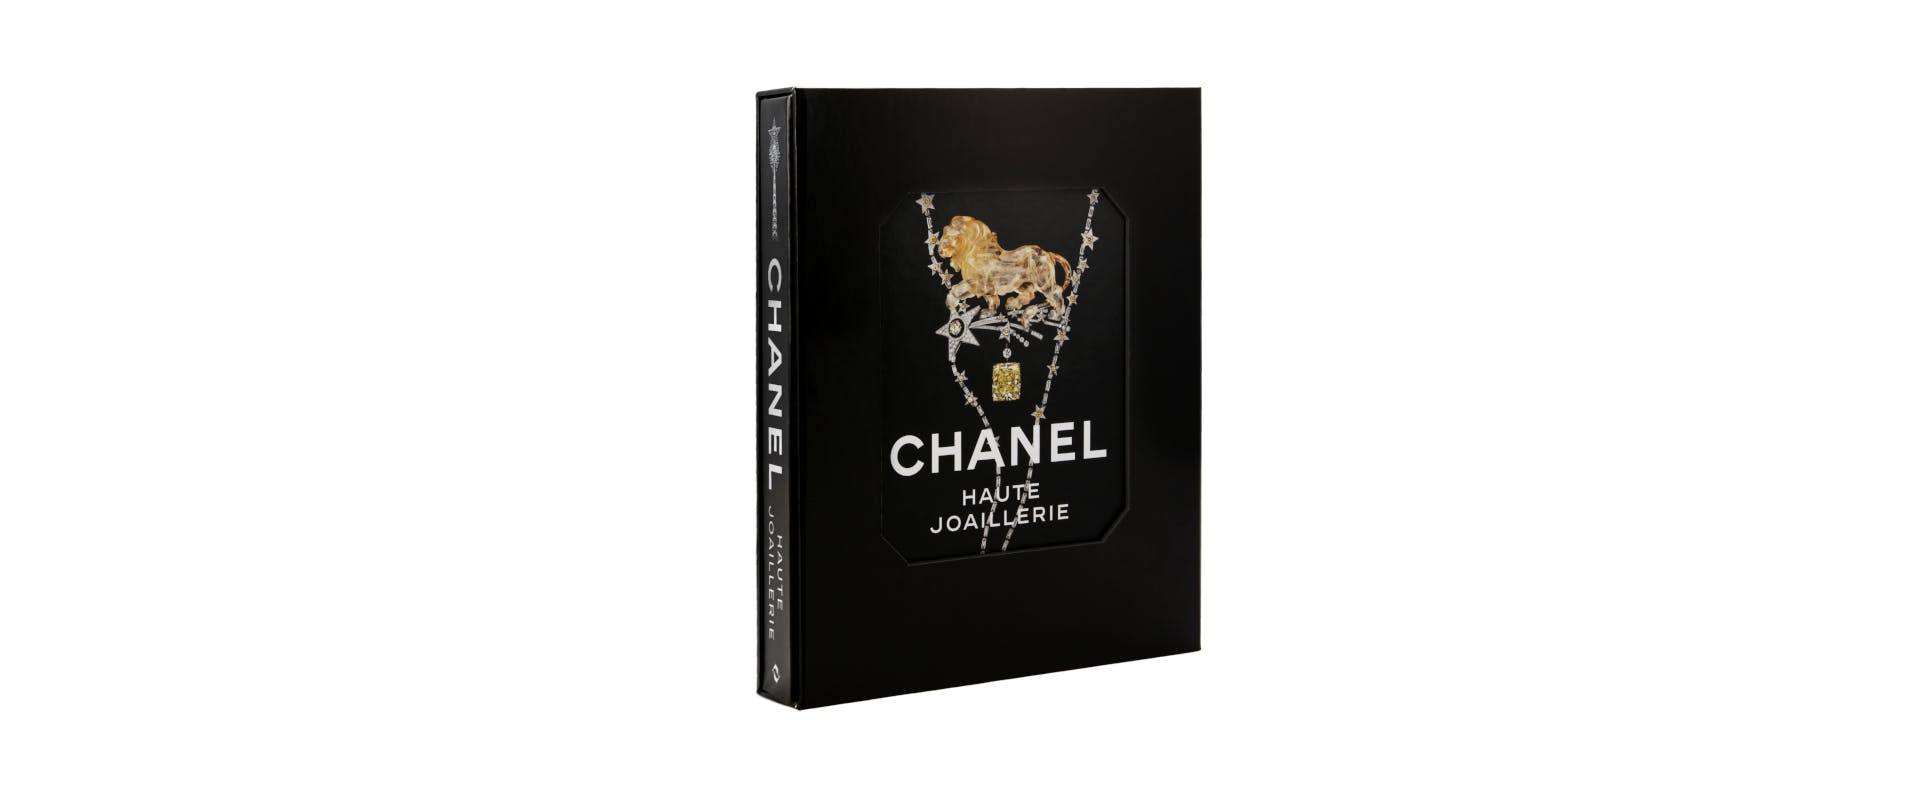 A Spectacular Book Celebrates The Exceptional CHANEL High Jewelry Creations